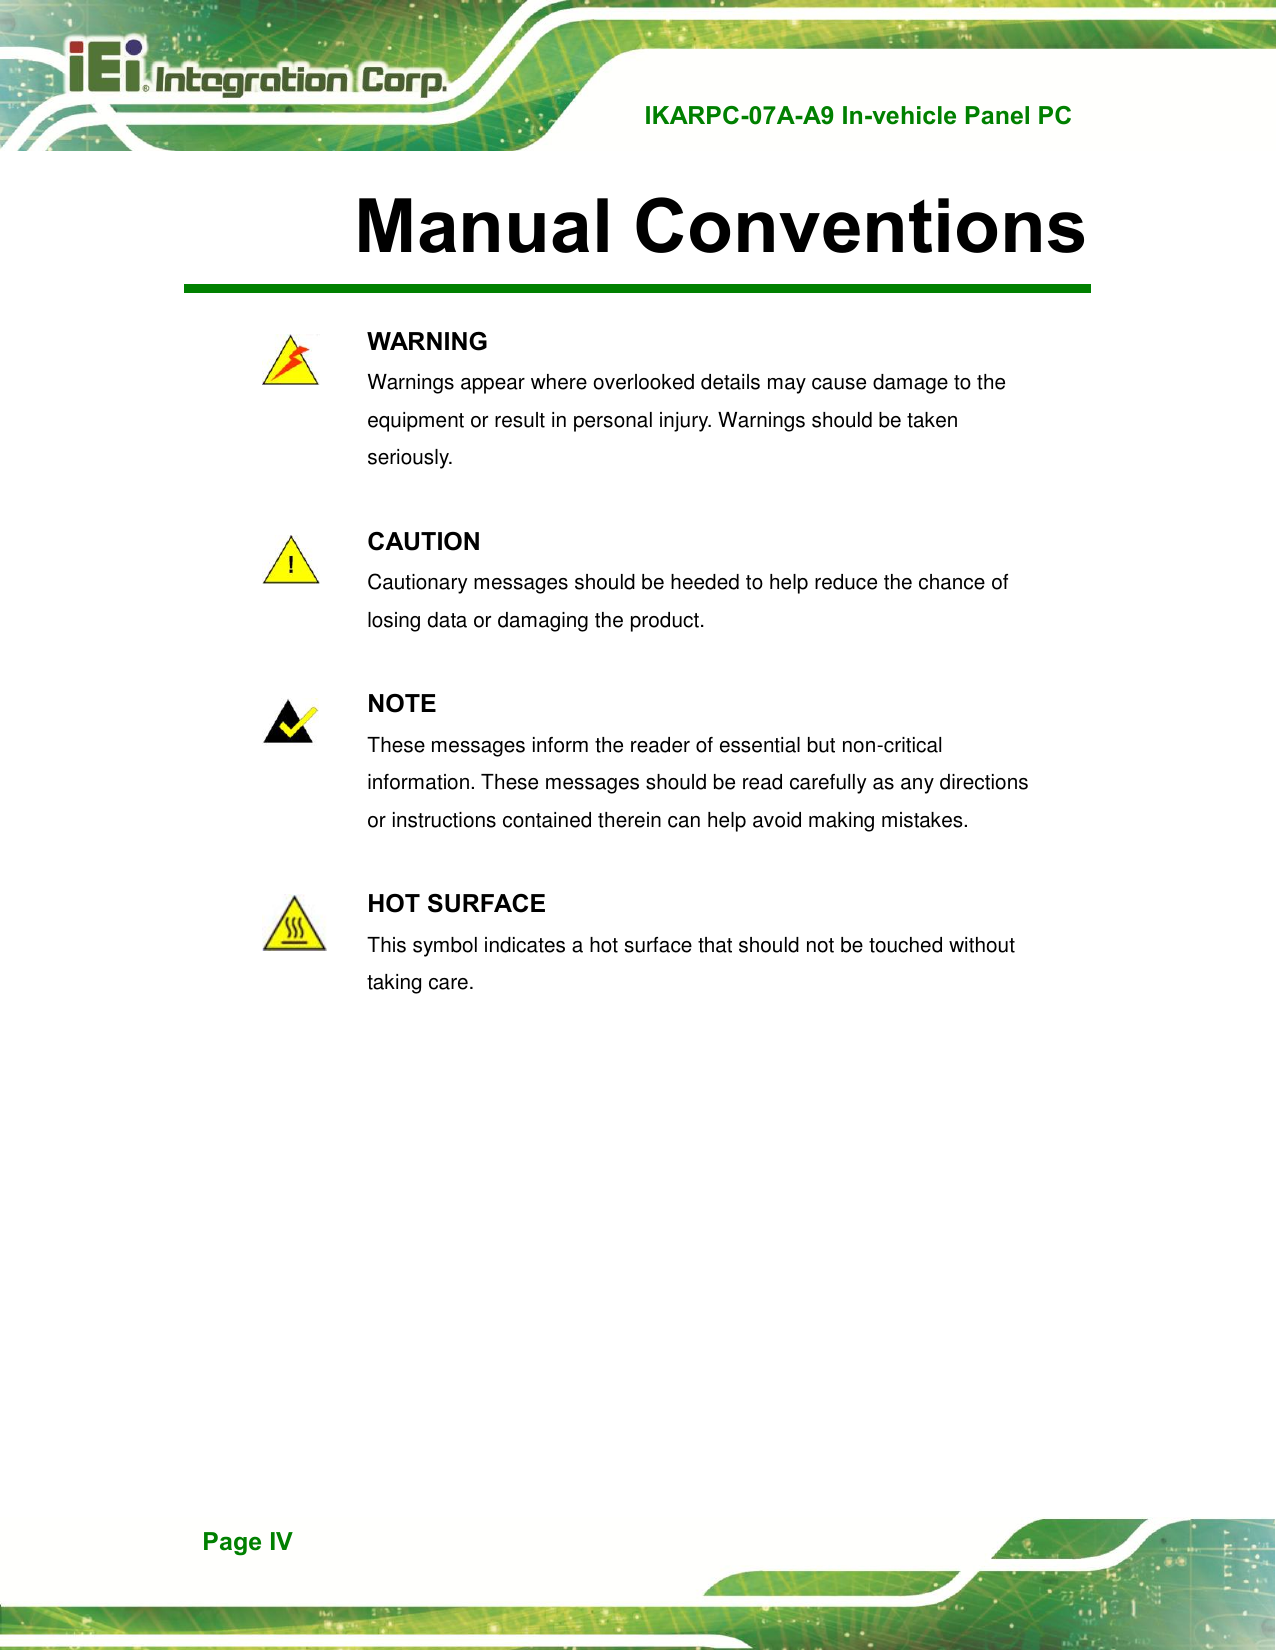   IKARPC-07A-A9 In-vehicle Panel PC  Page IV Manual Conventions     WARNING Warnings appear where overlooked details may cause damage to the equipment or result in personal injury. Warnings should be taken seriously.   CAUTION Cautionary messages should be heeded to help reduce the chance of losing data or damaging the product.     NOTE These messages inform the reader of essential but non-critical information. These messages should be read carefully as any directions or instructions contained therein can help avoid making mistakes.   HOT SURFACE This symbol indicates a hot surface that should not be touched without taking care. 